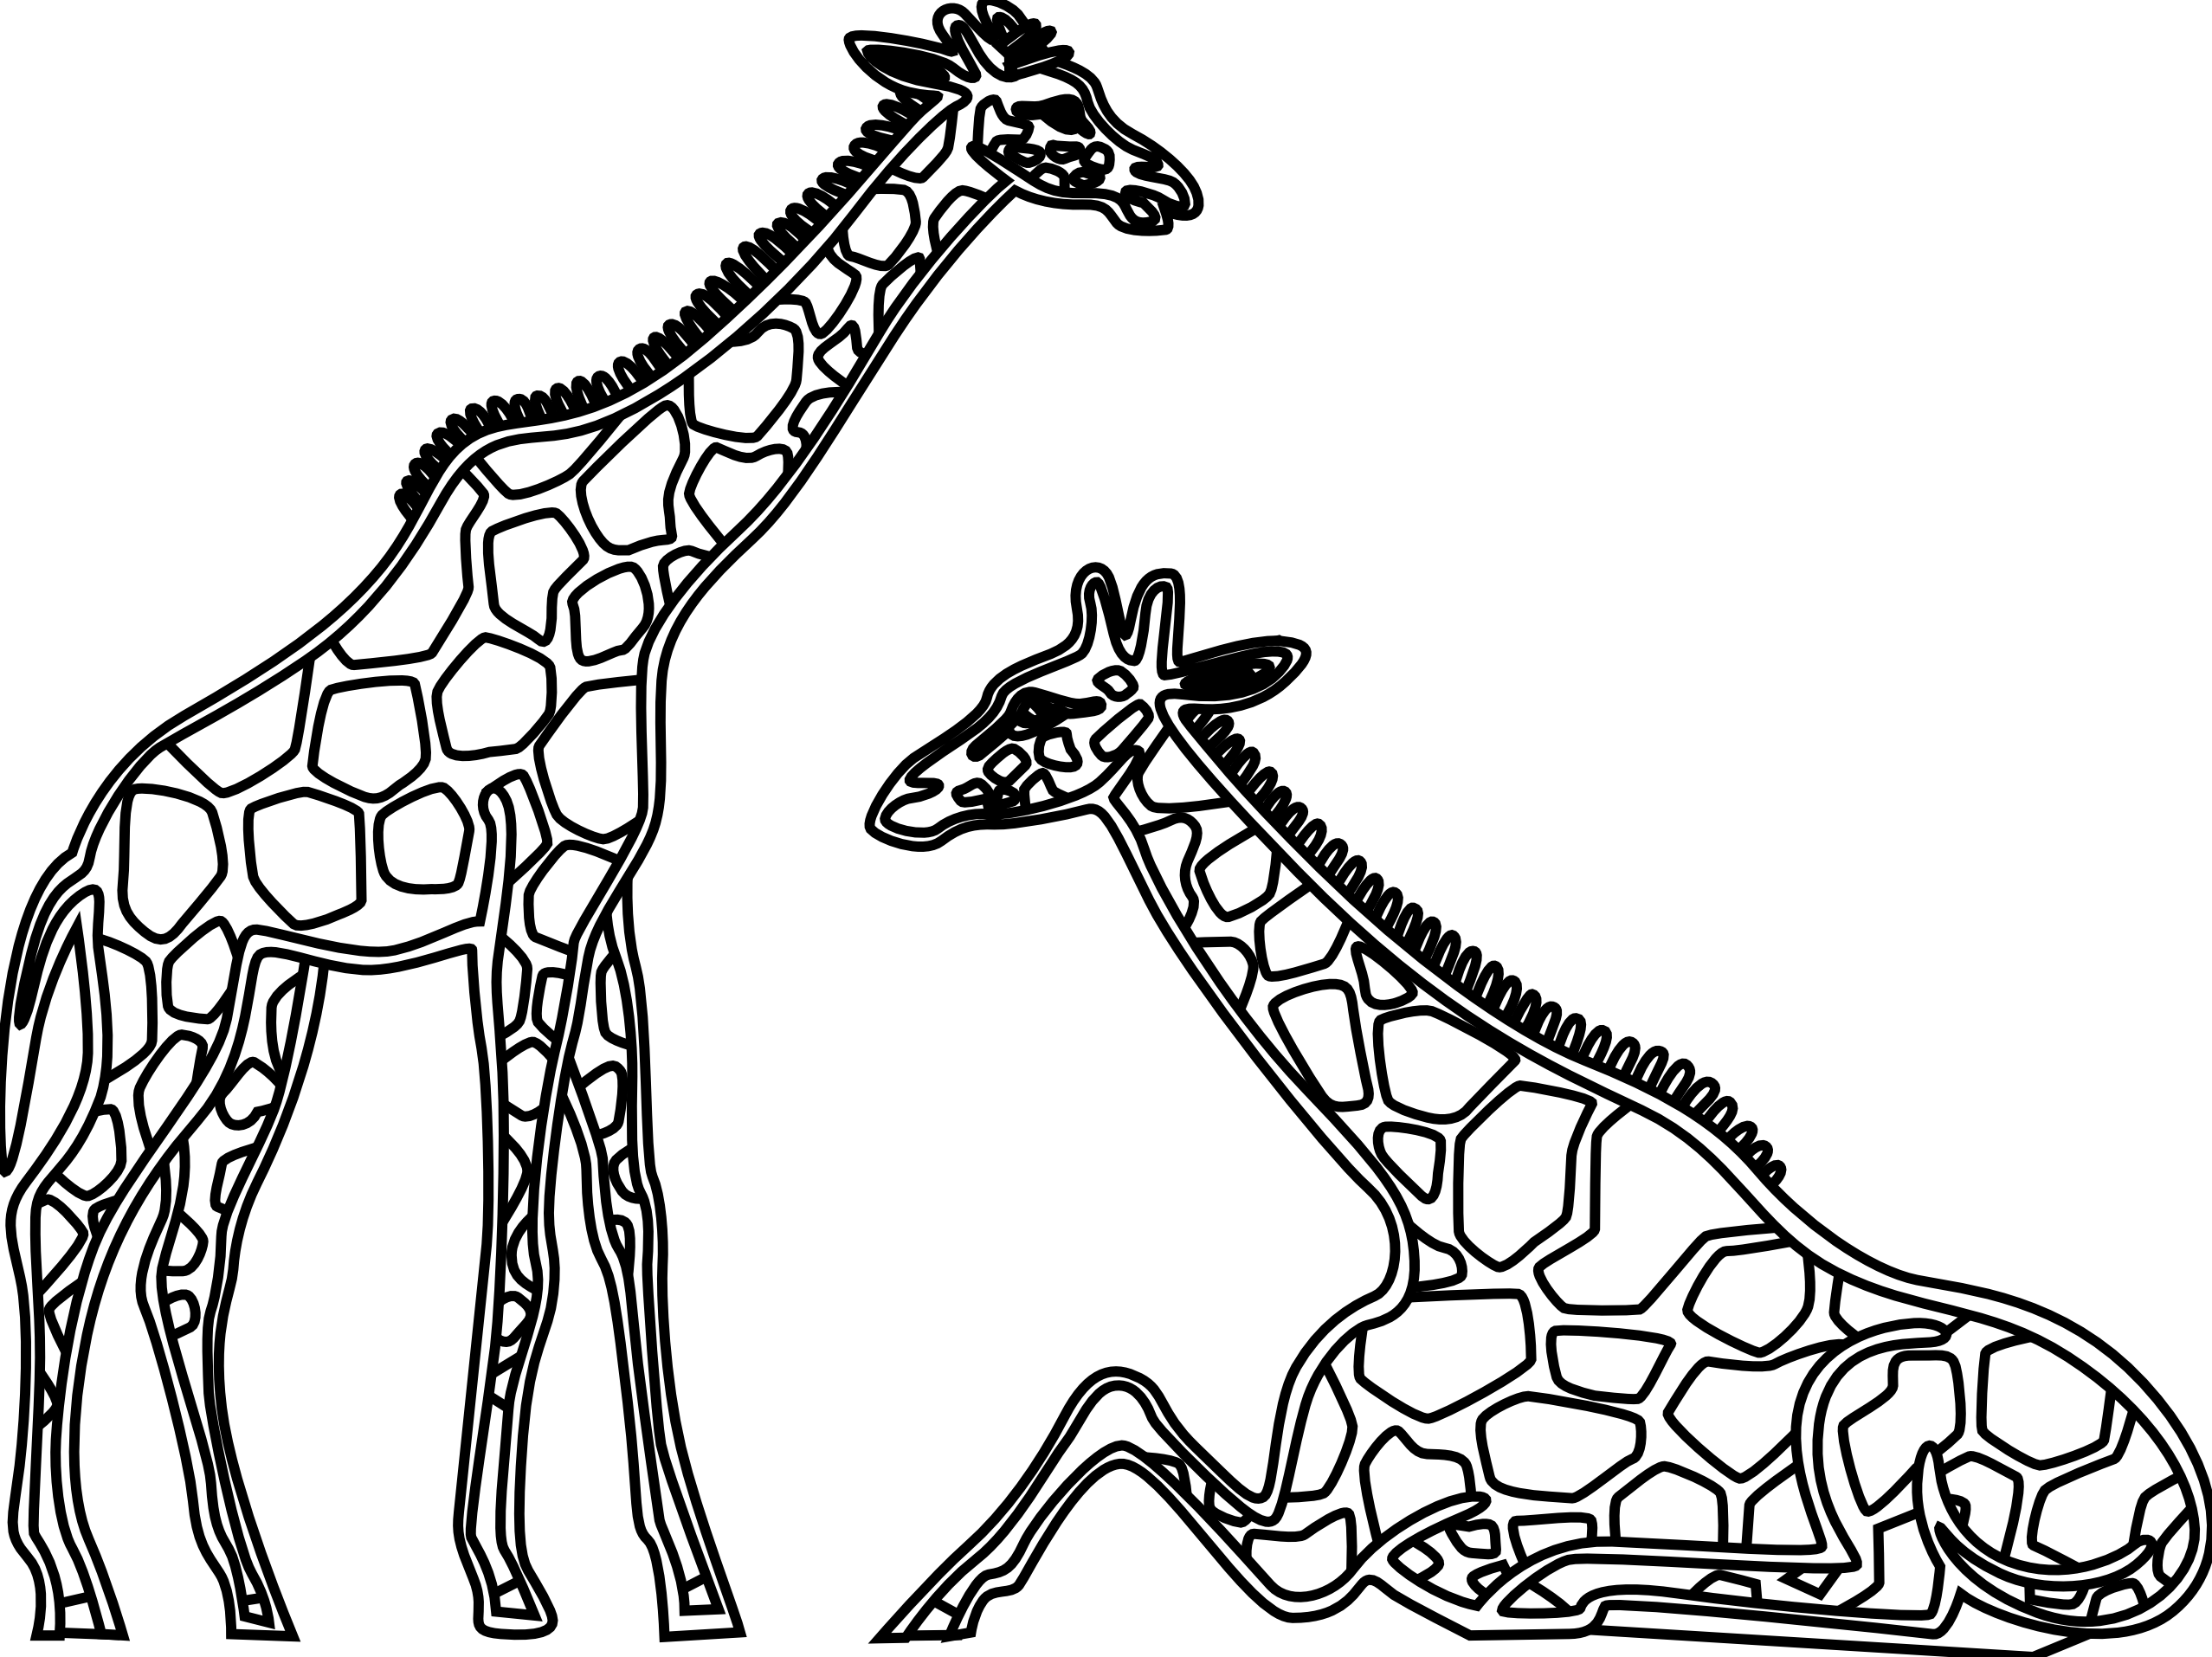 free black and white zoo animal clipart - photo #46